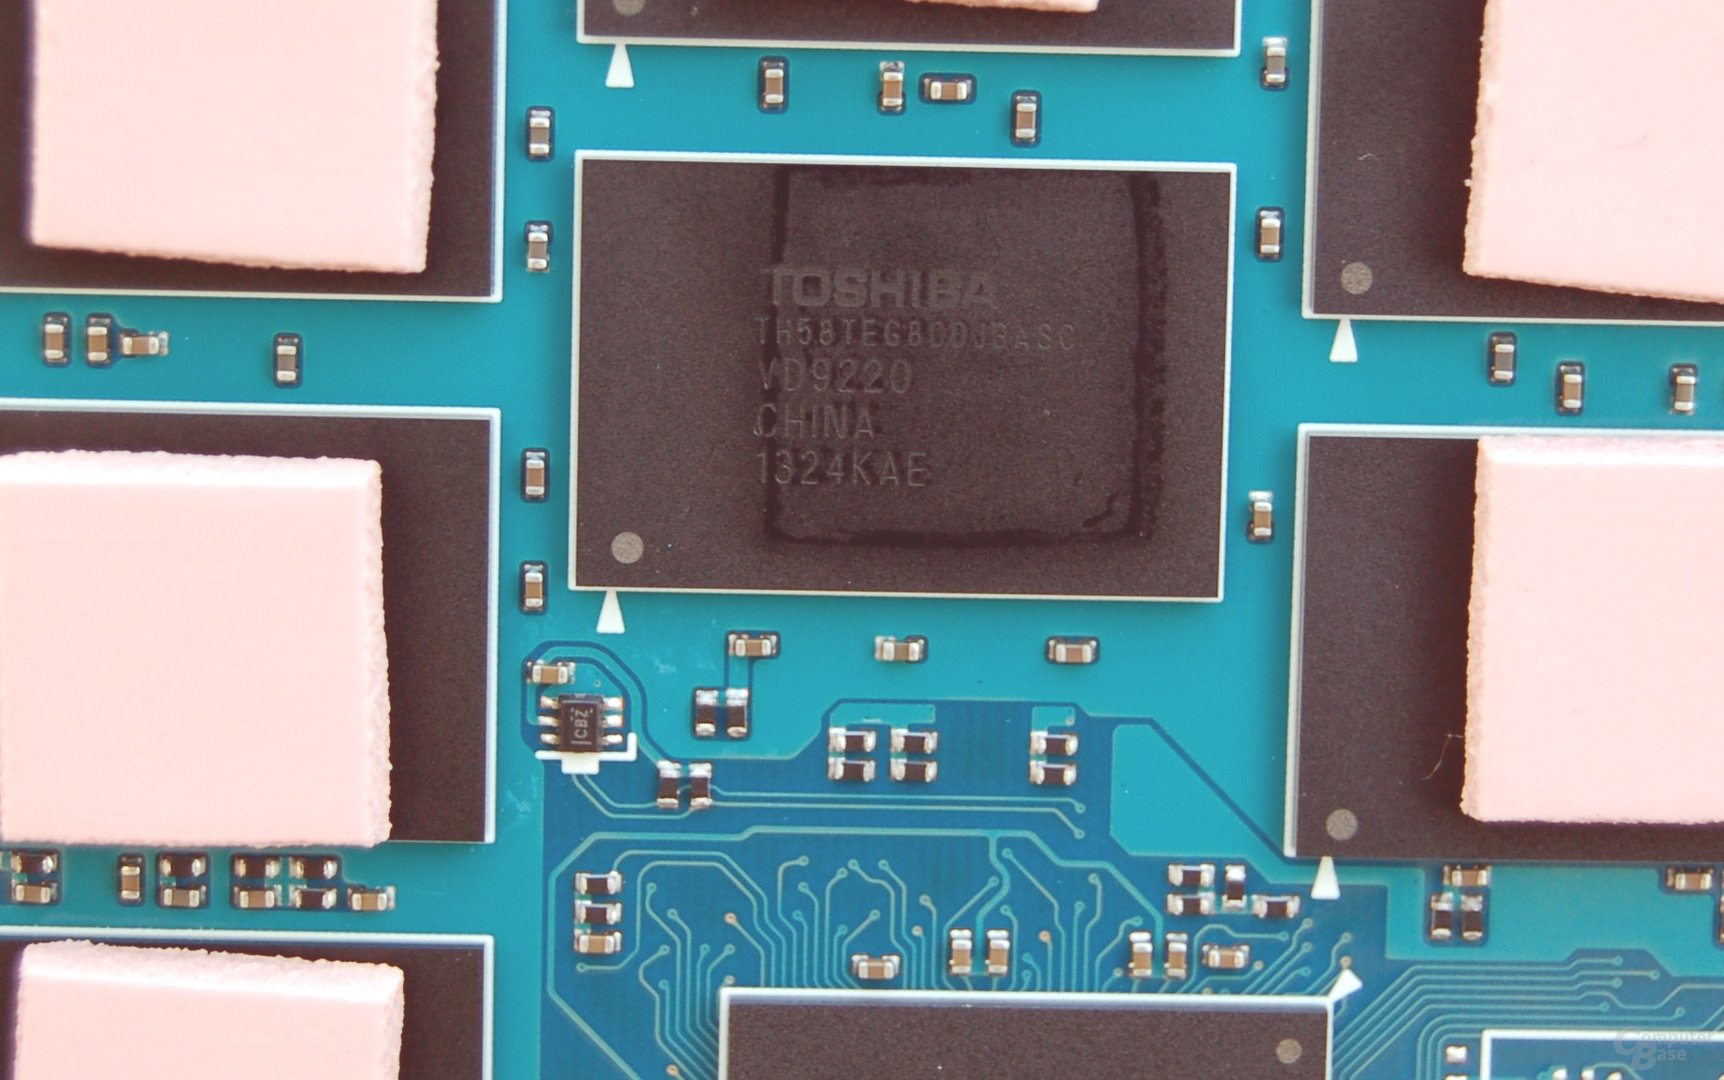 MLC module manufactured by Toshiba in 19 nm "class =" border-image